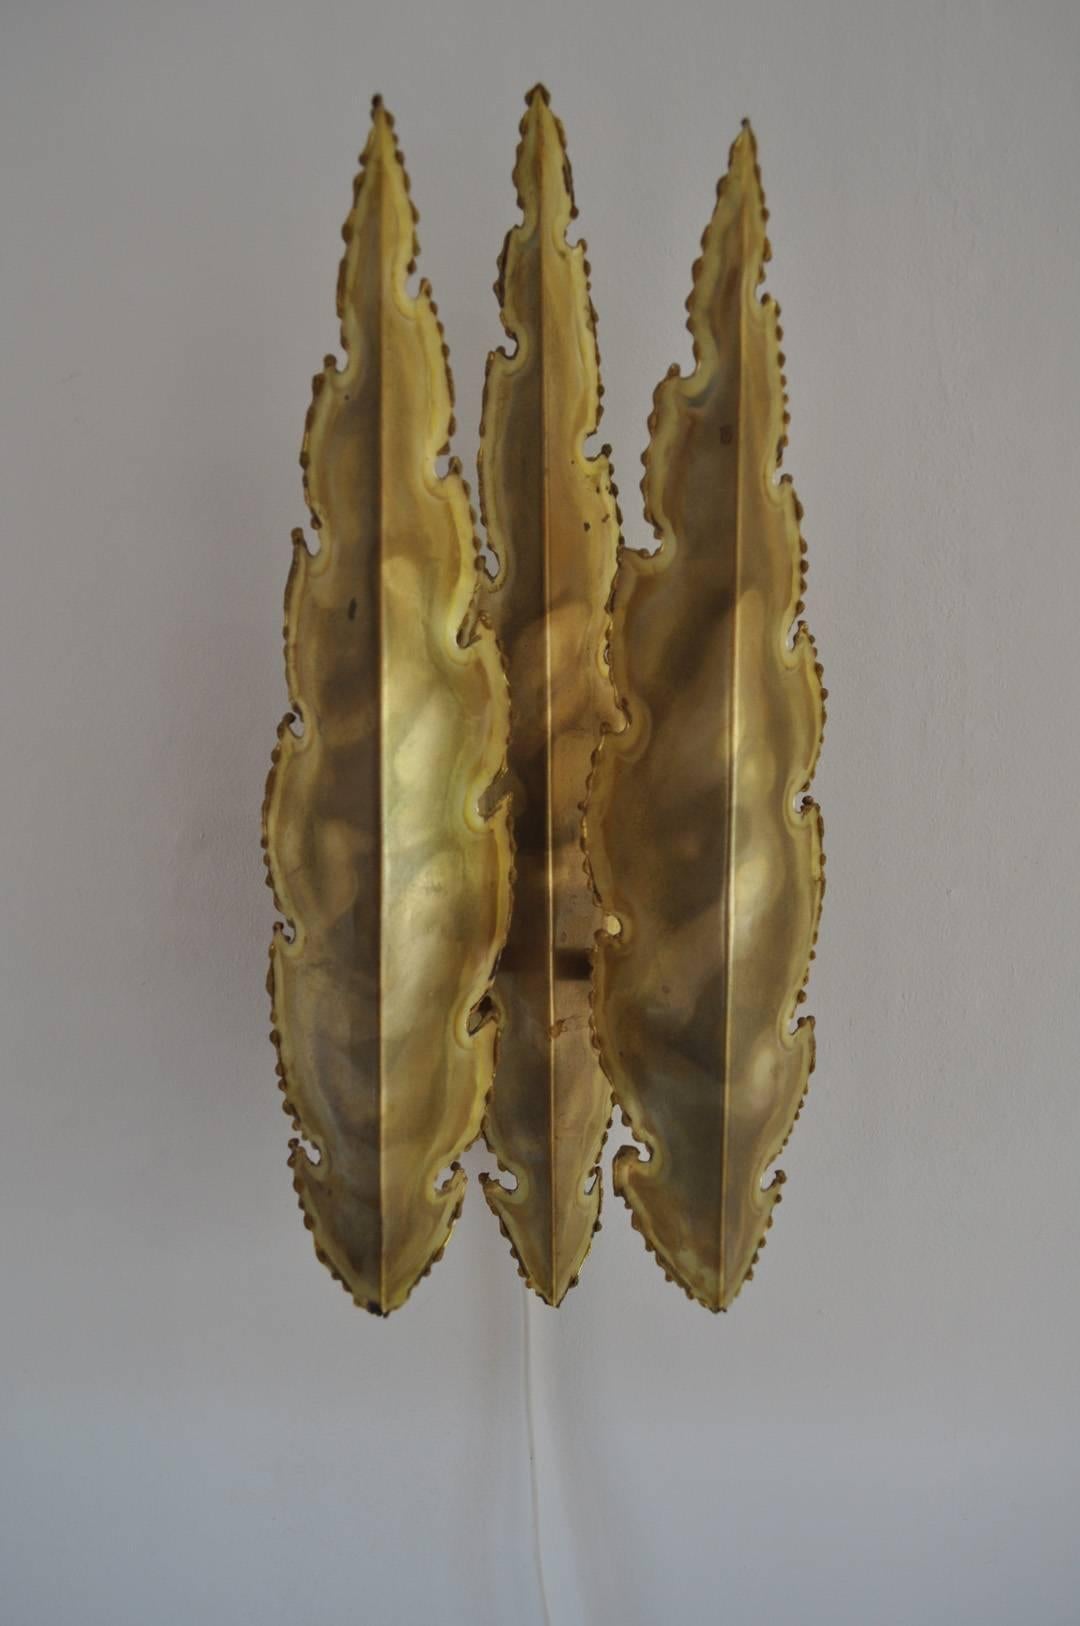 Danish Brass Wall Lamp by Svend Aage Holm Sørensen, the 1960s in Denmark